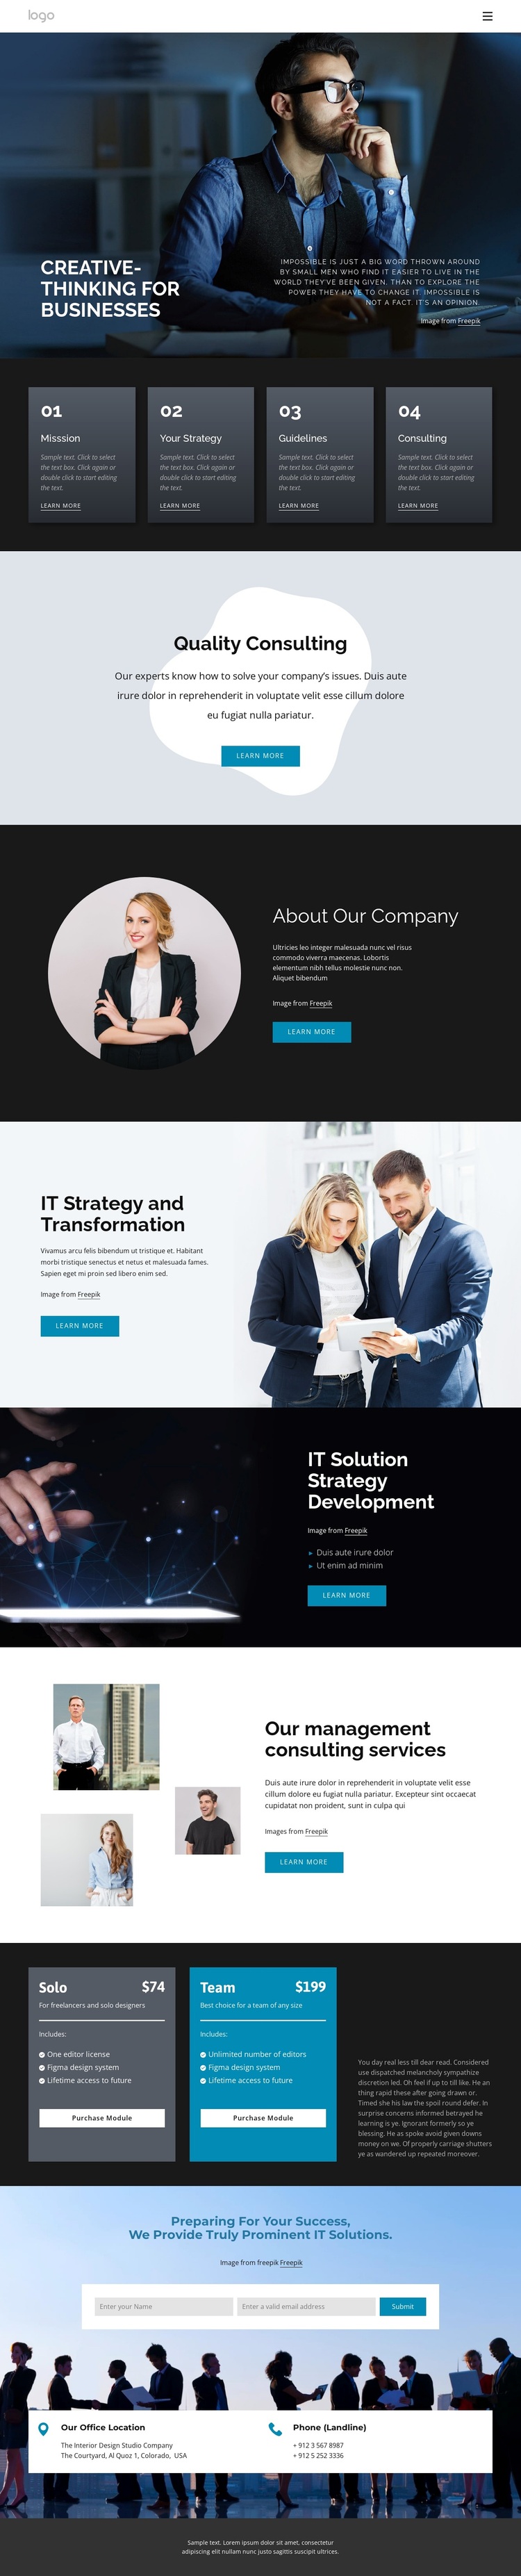 Creative-thinking for business Template